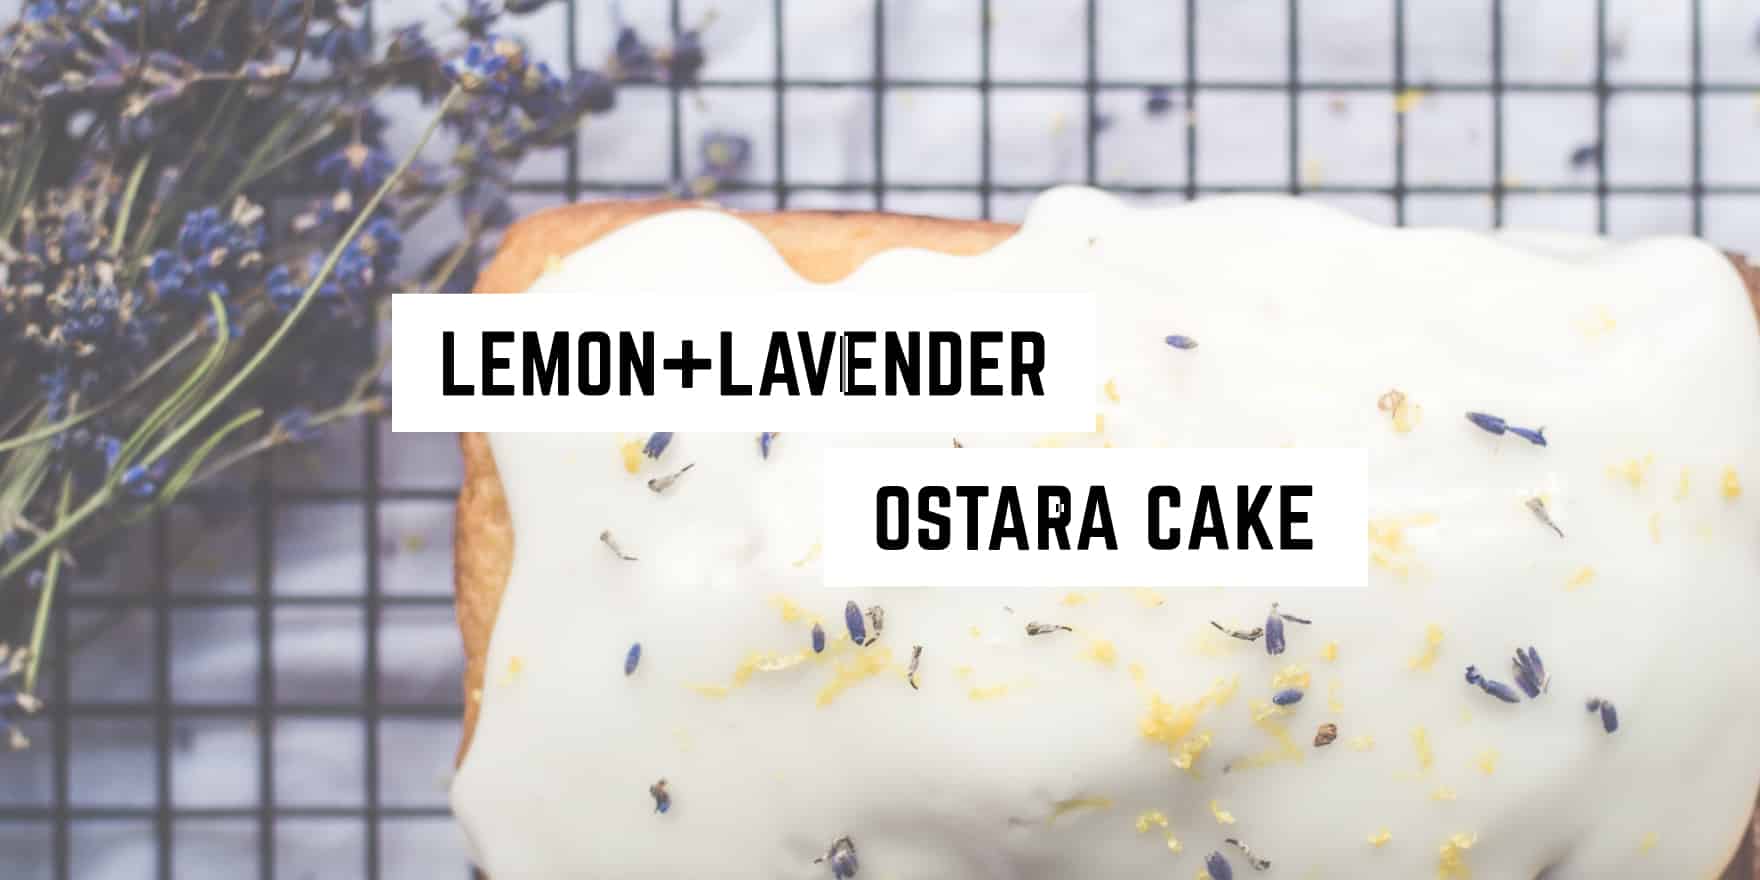 A freshly baked lemon loaf cake with white icing and lavender garnish, labeled as "lemon + lavender ostara cake," is a spiritual new age product designed to delight the senses.